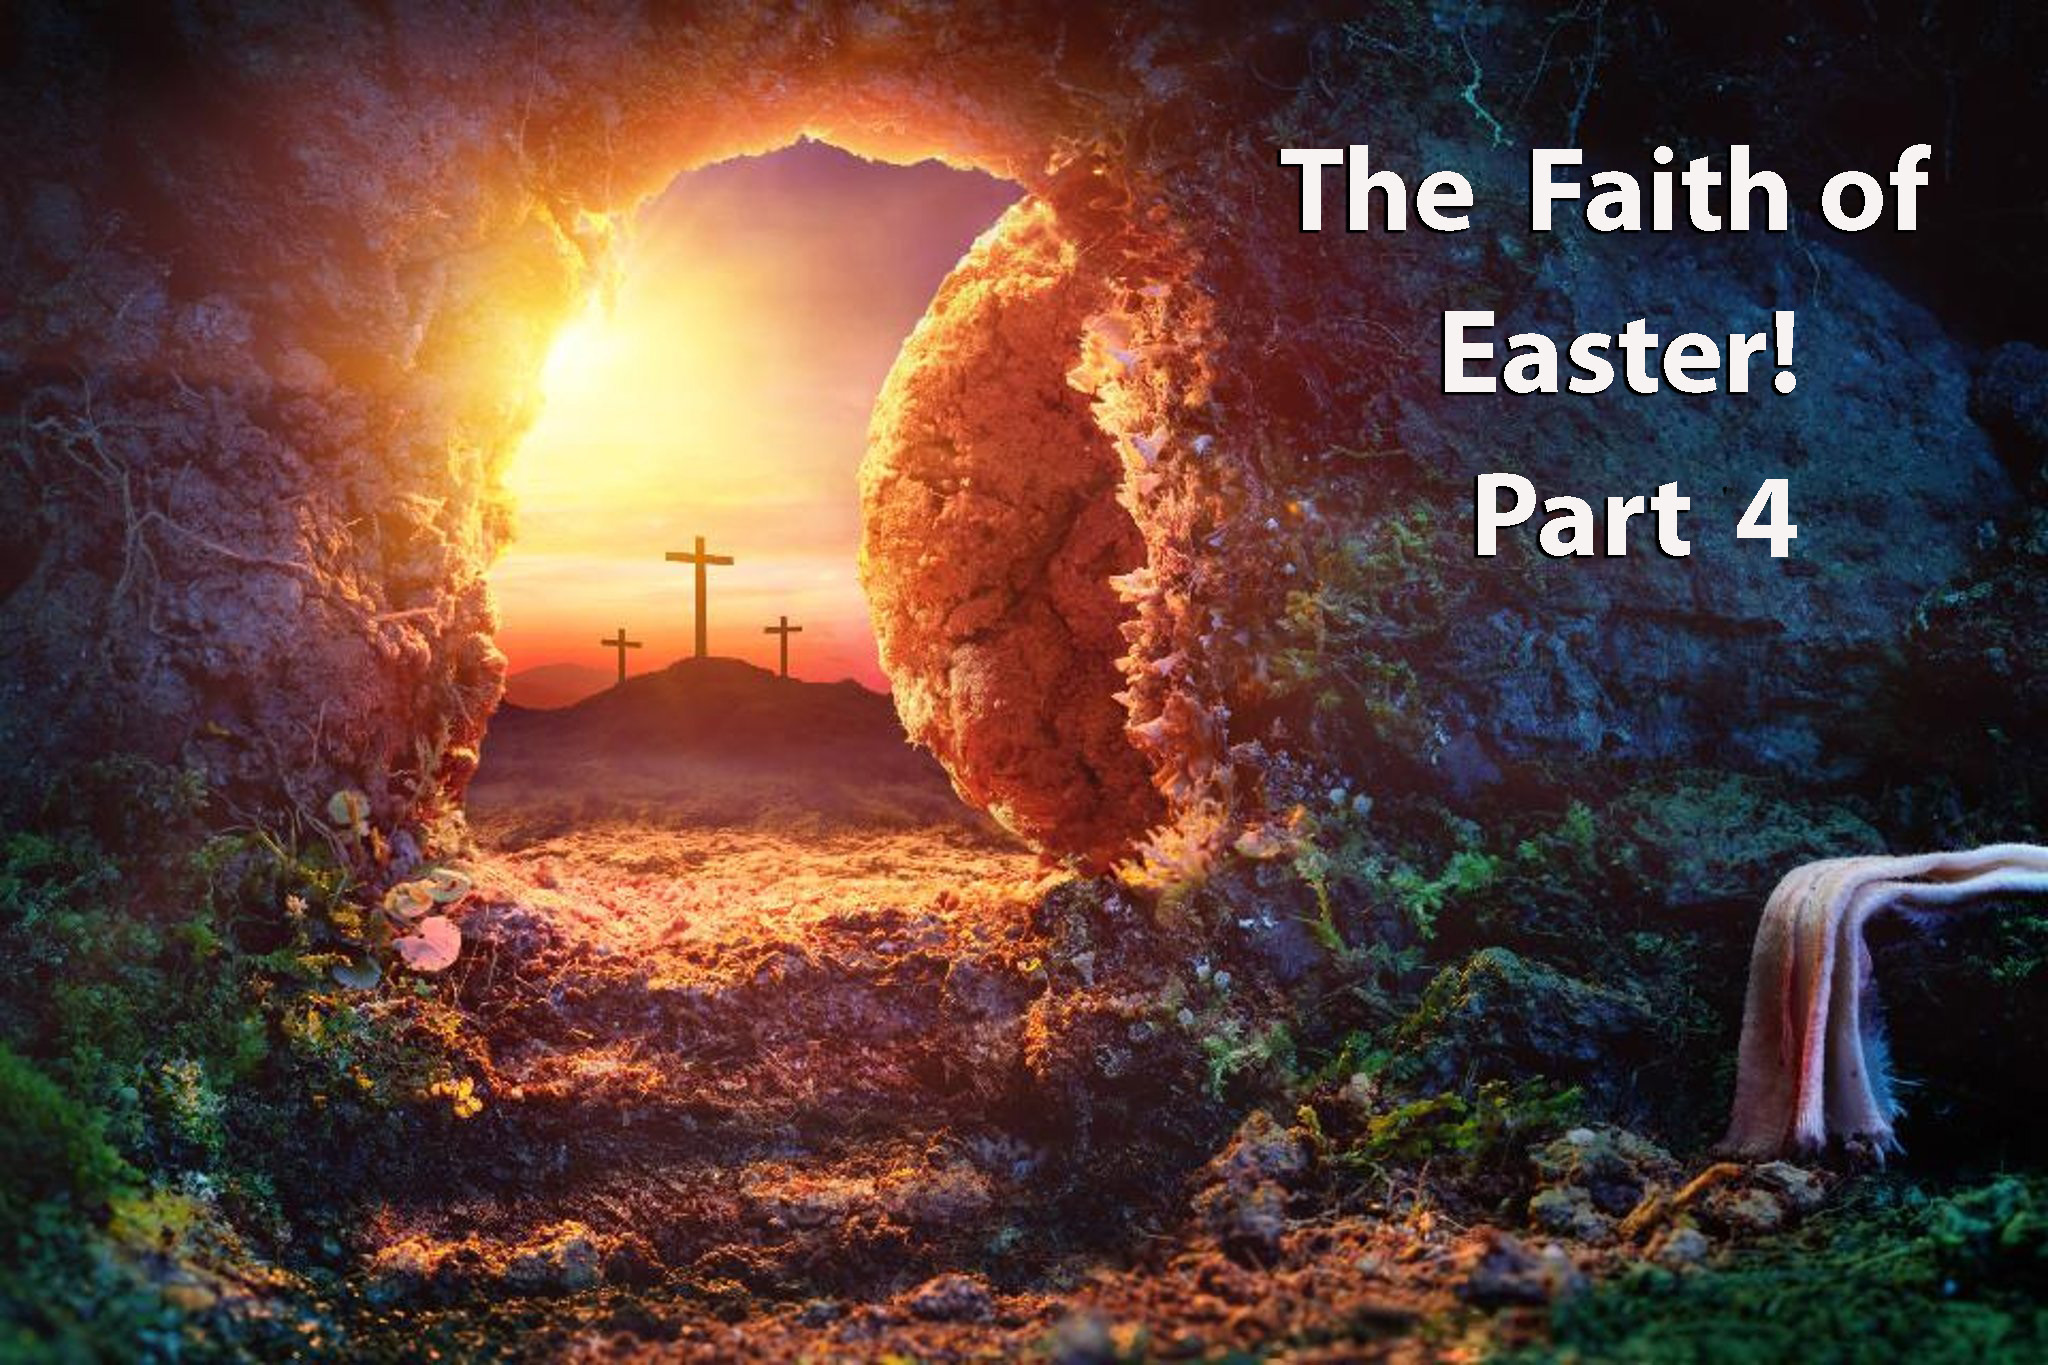 The Faith of Easter! Part 4 Mary the mother of Jesus